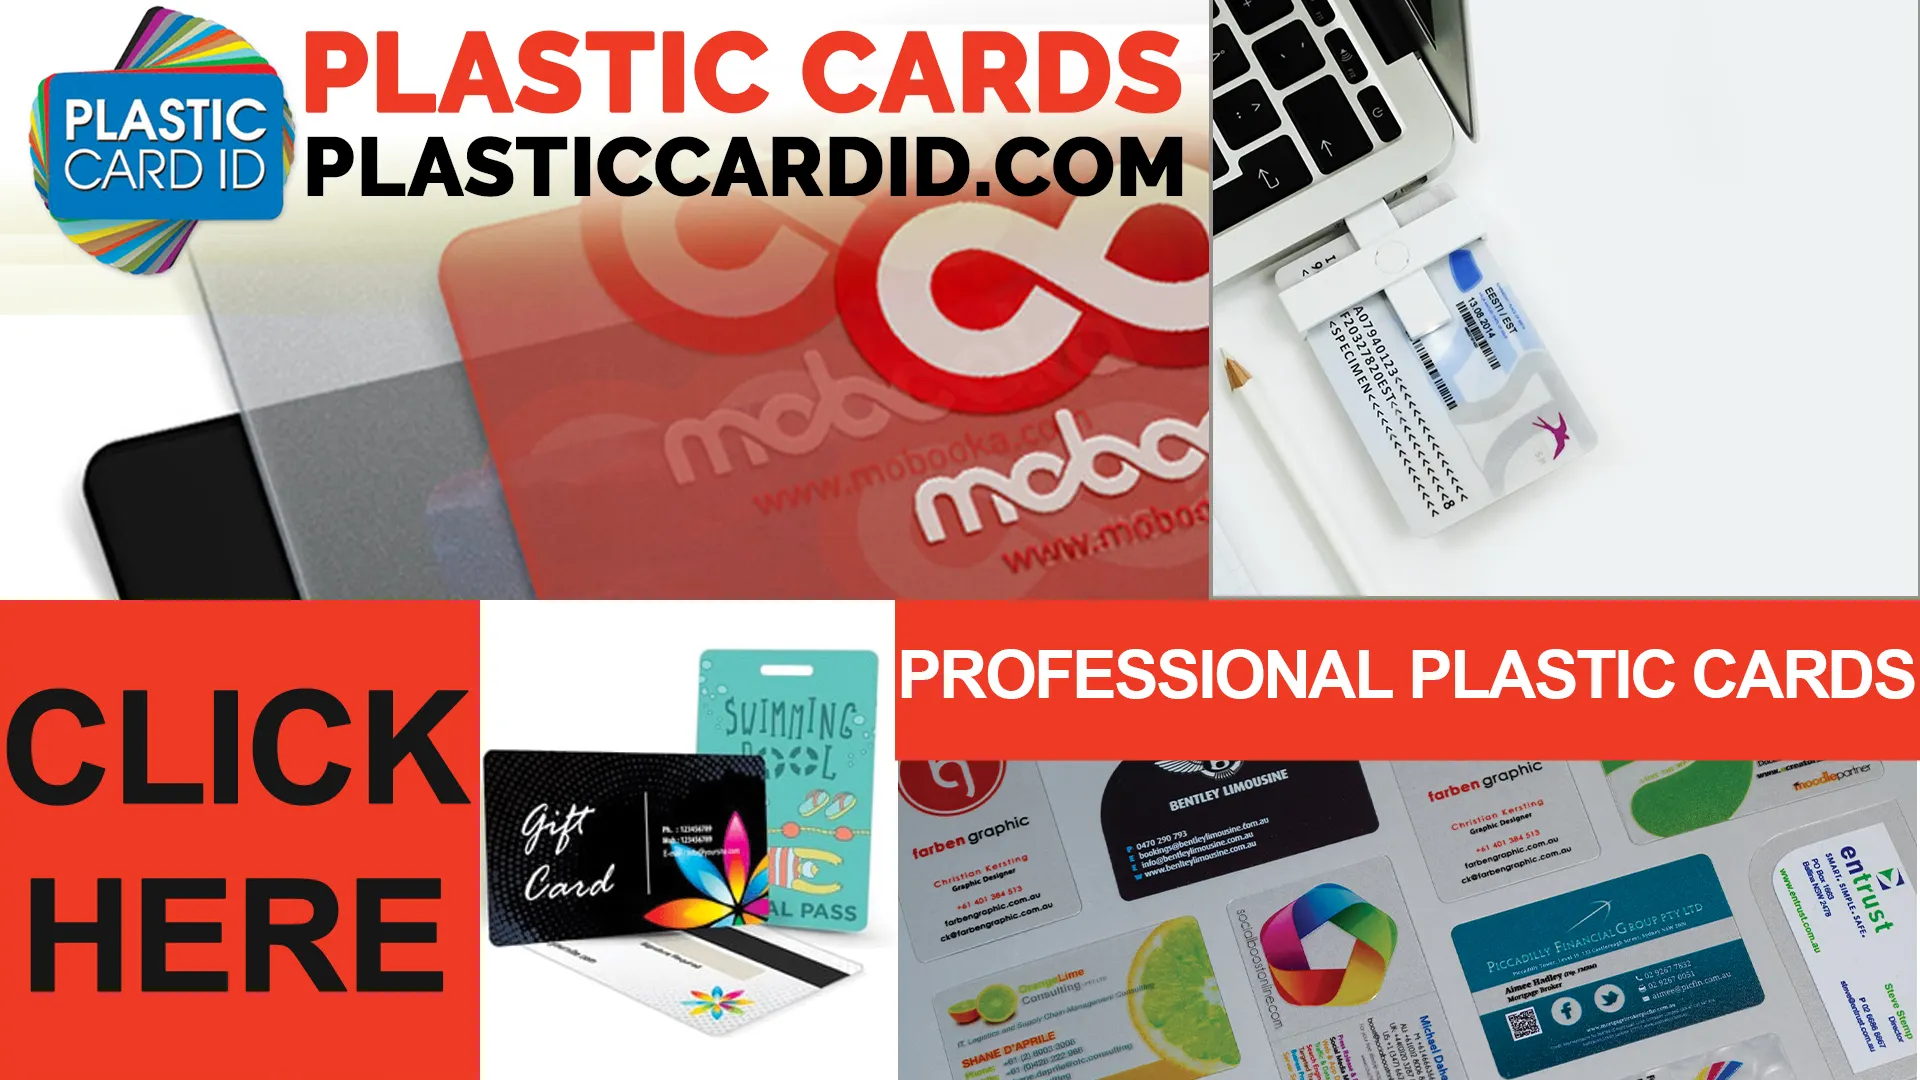 Welcome to Plastic Card ID
: Excellence in Corporate Event Badges